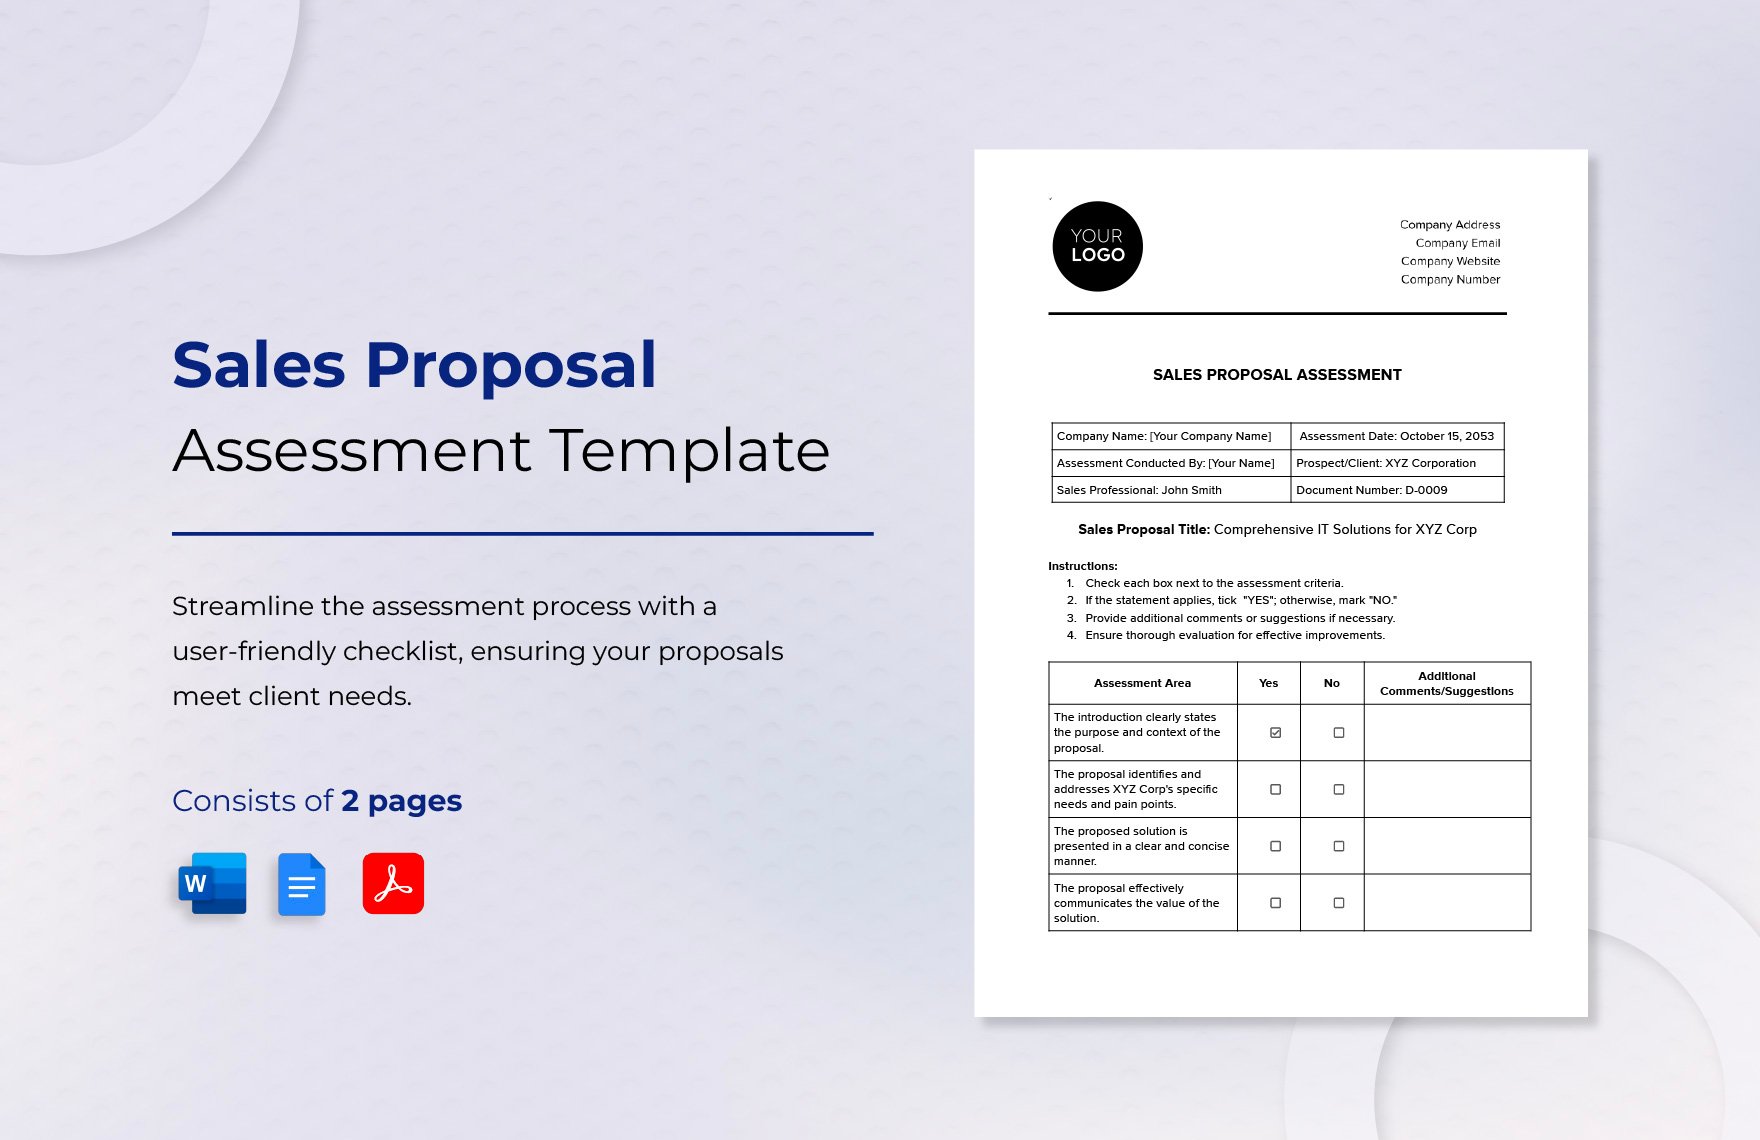 Sales Proposal Assessment Template in Word, Google Docs, PDF